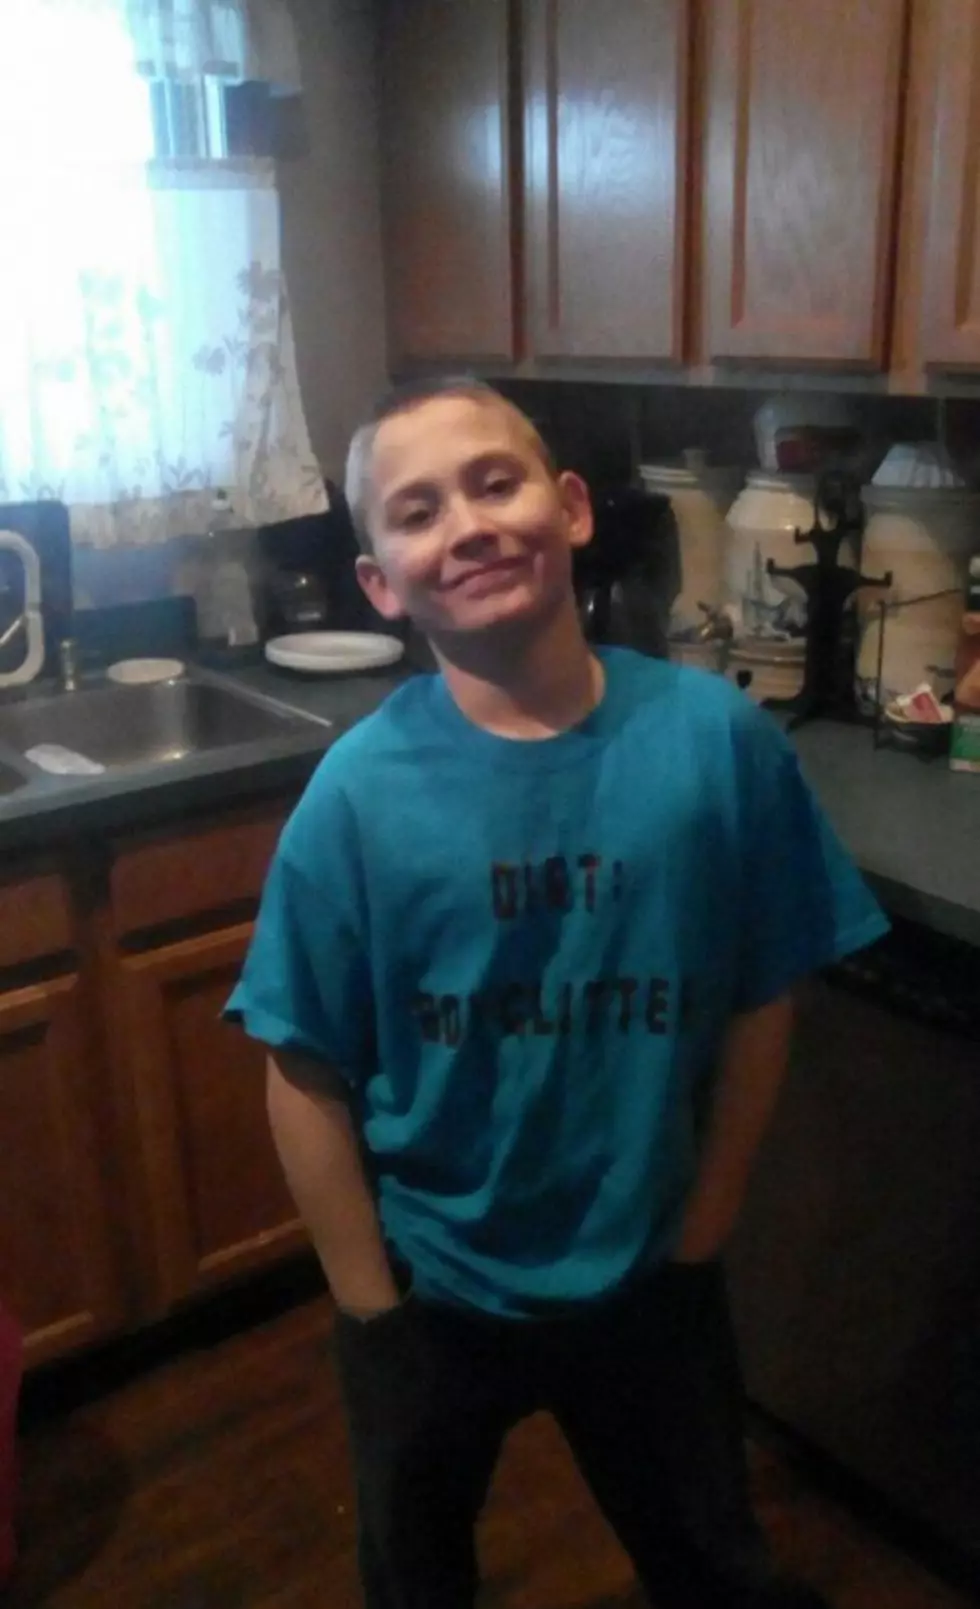 Three Arrested on Homicide Charges For Death of 12-Year-Old-Boy